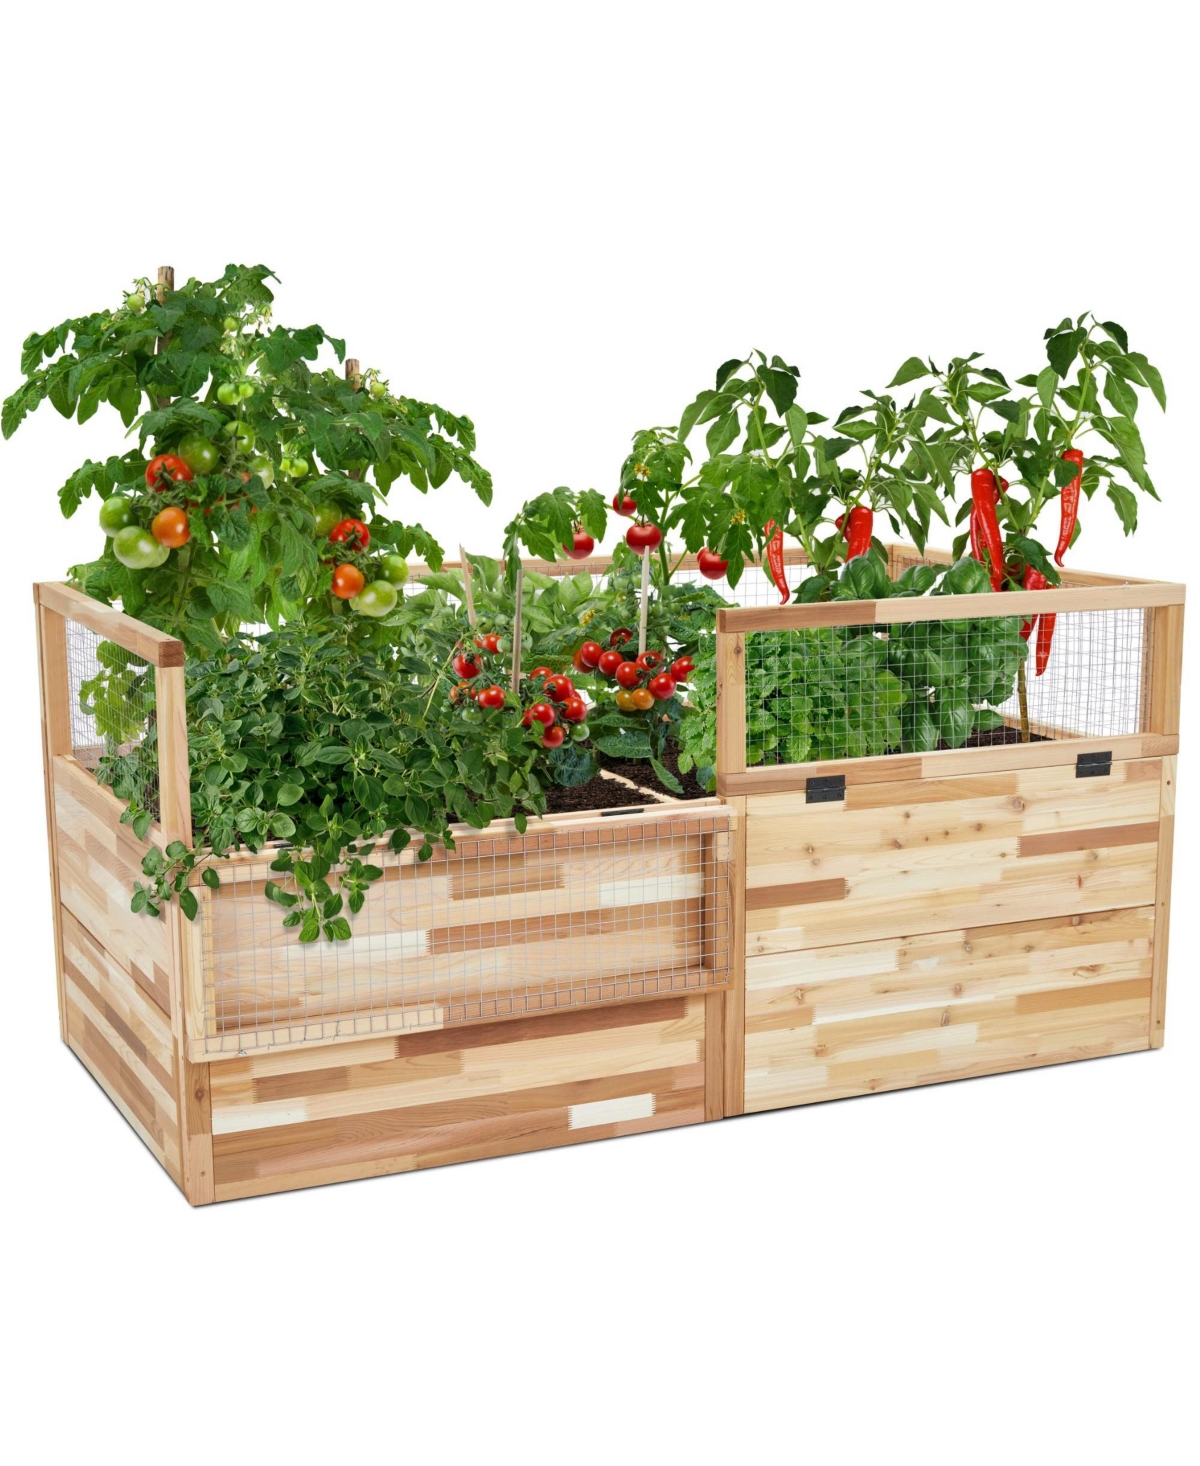 Raised Garden Bed, Elevated Herb Planter for Growing Fresh Herbs - Brown